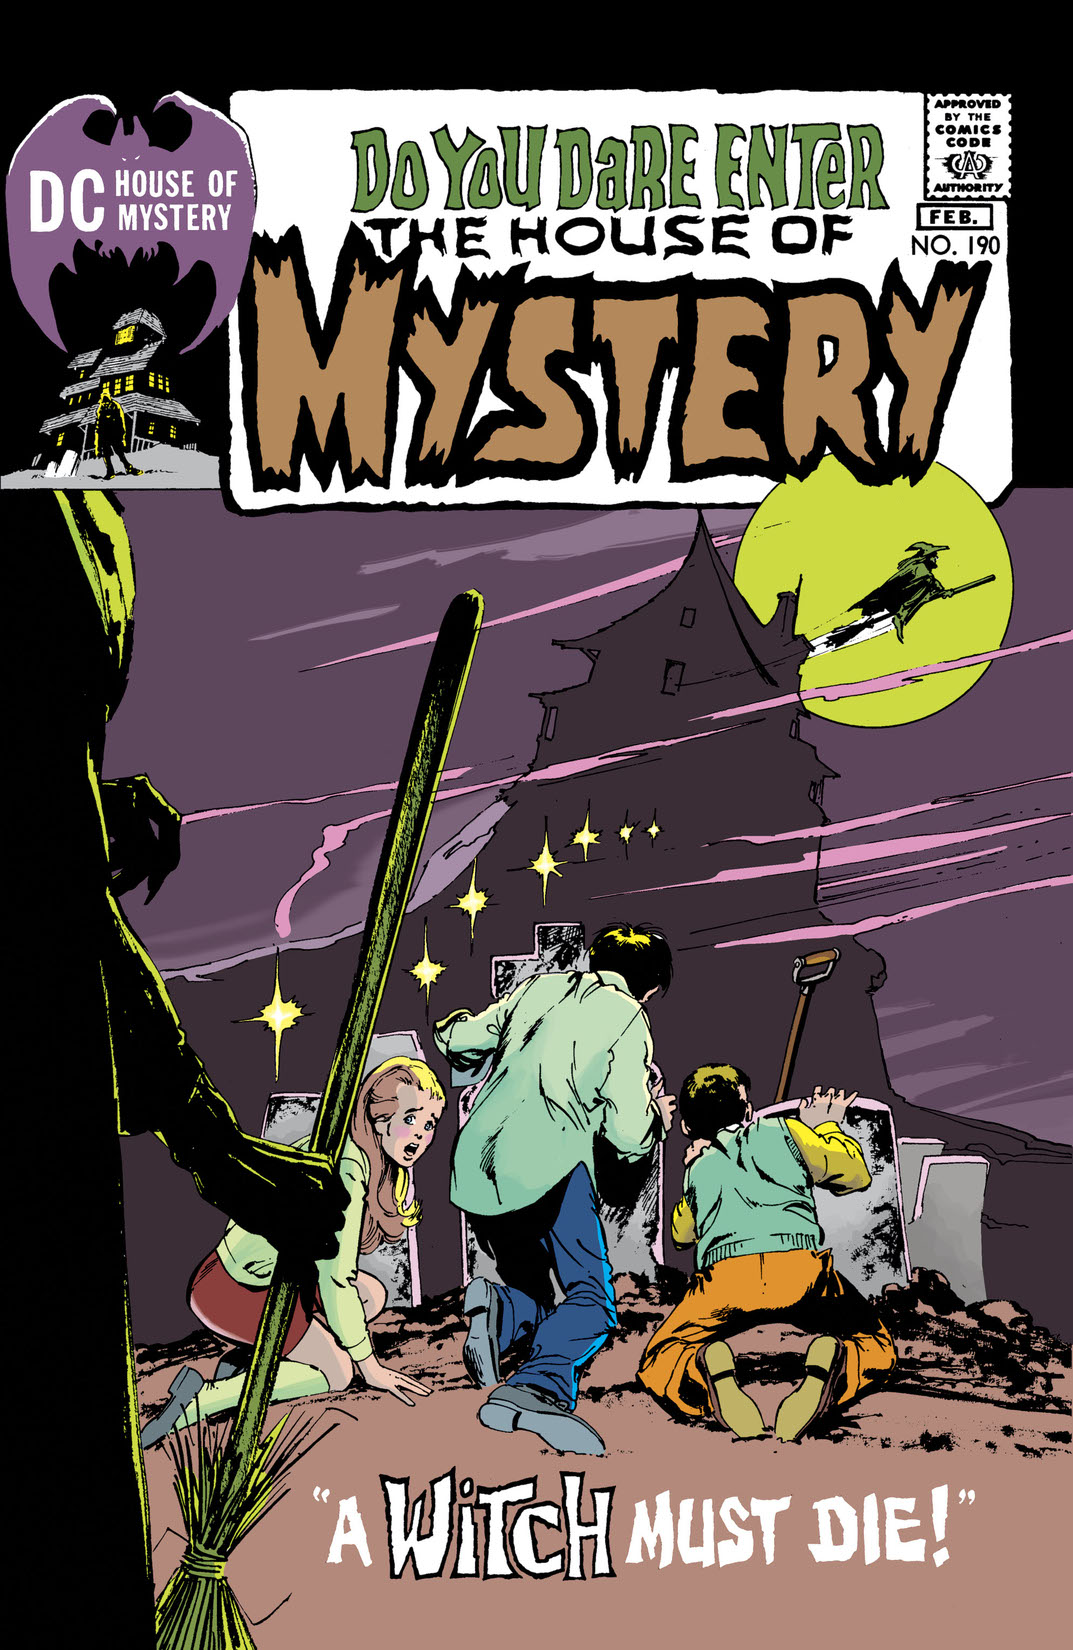 House of Mystery (1951-) #190 preview images